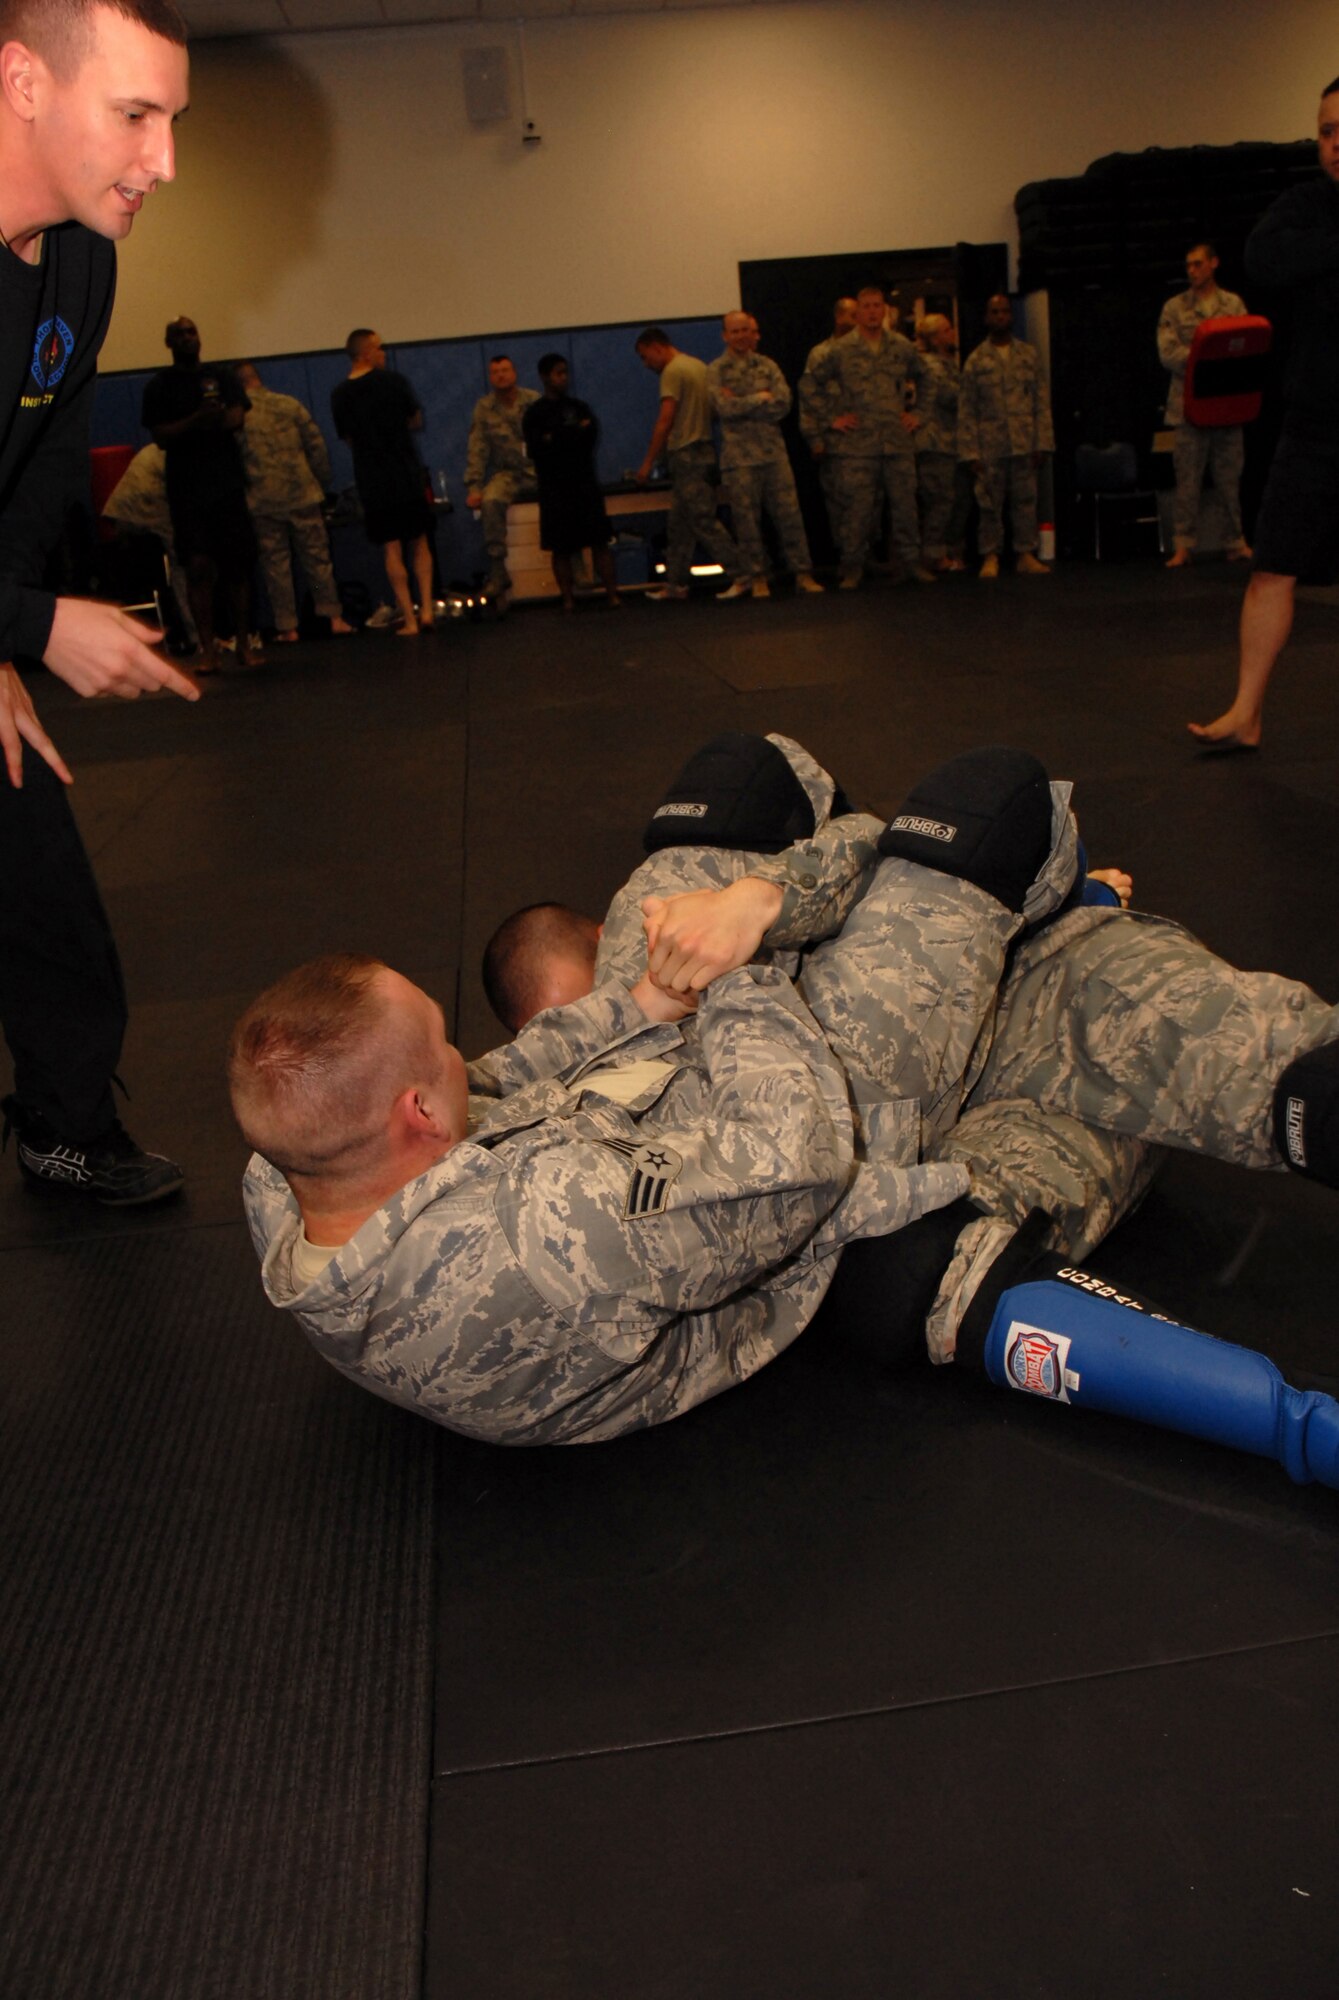 Fly-Away Security Team (FAST) instructor, Tech. Sgt. Shane Spice, 421 Combat Training Squadron, guides a student in the proper application of an arm bar during a training match at the U.S. Air Force Expeditionary Center, Joint Base McGuire-Dix-Lakehurst, N.J. on June 4, 2009. FAST members provide airfield assessment and aircraft security for Air Force Central Command  transient resources. (U.S. Air Force Photo/Tech. Sgt. Paul R. Evans)